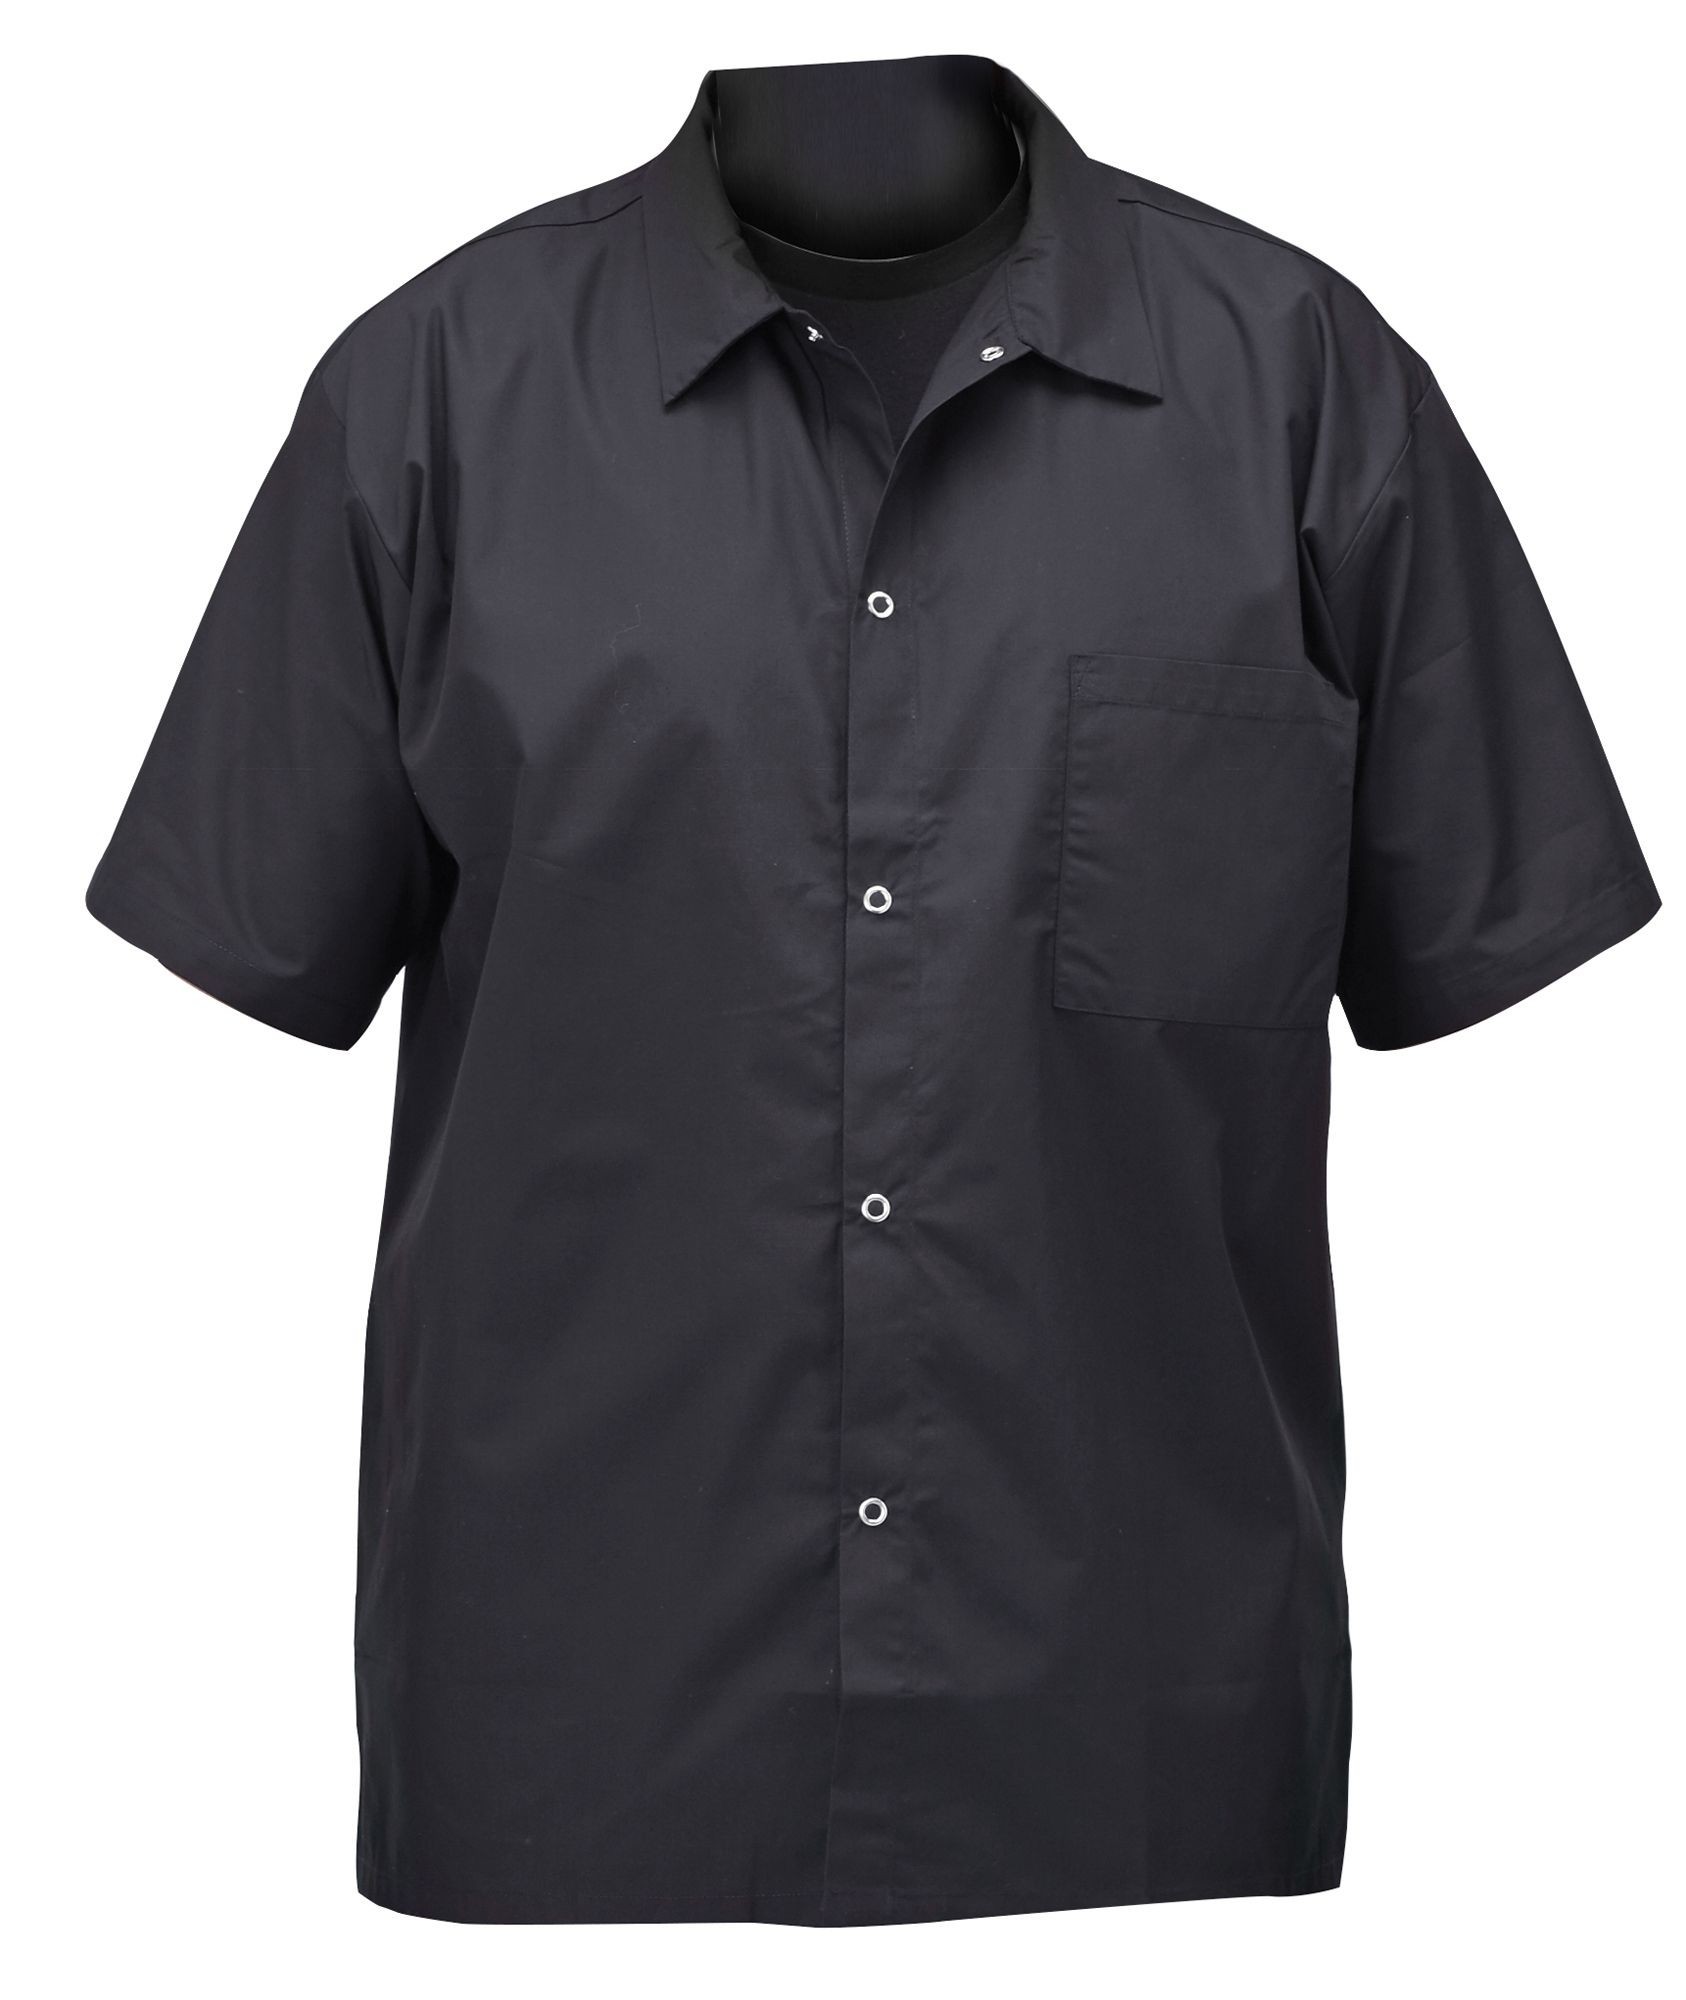 Winco UNF-1KL Black Poly-Cotton Blend Short Sleeved Chef Shirt, Large